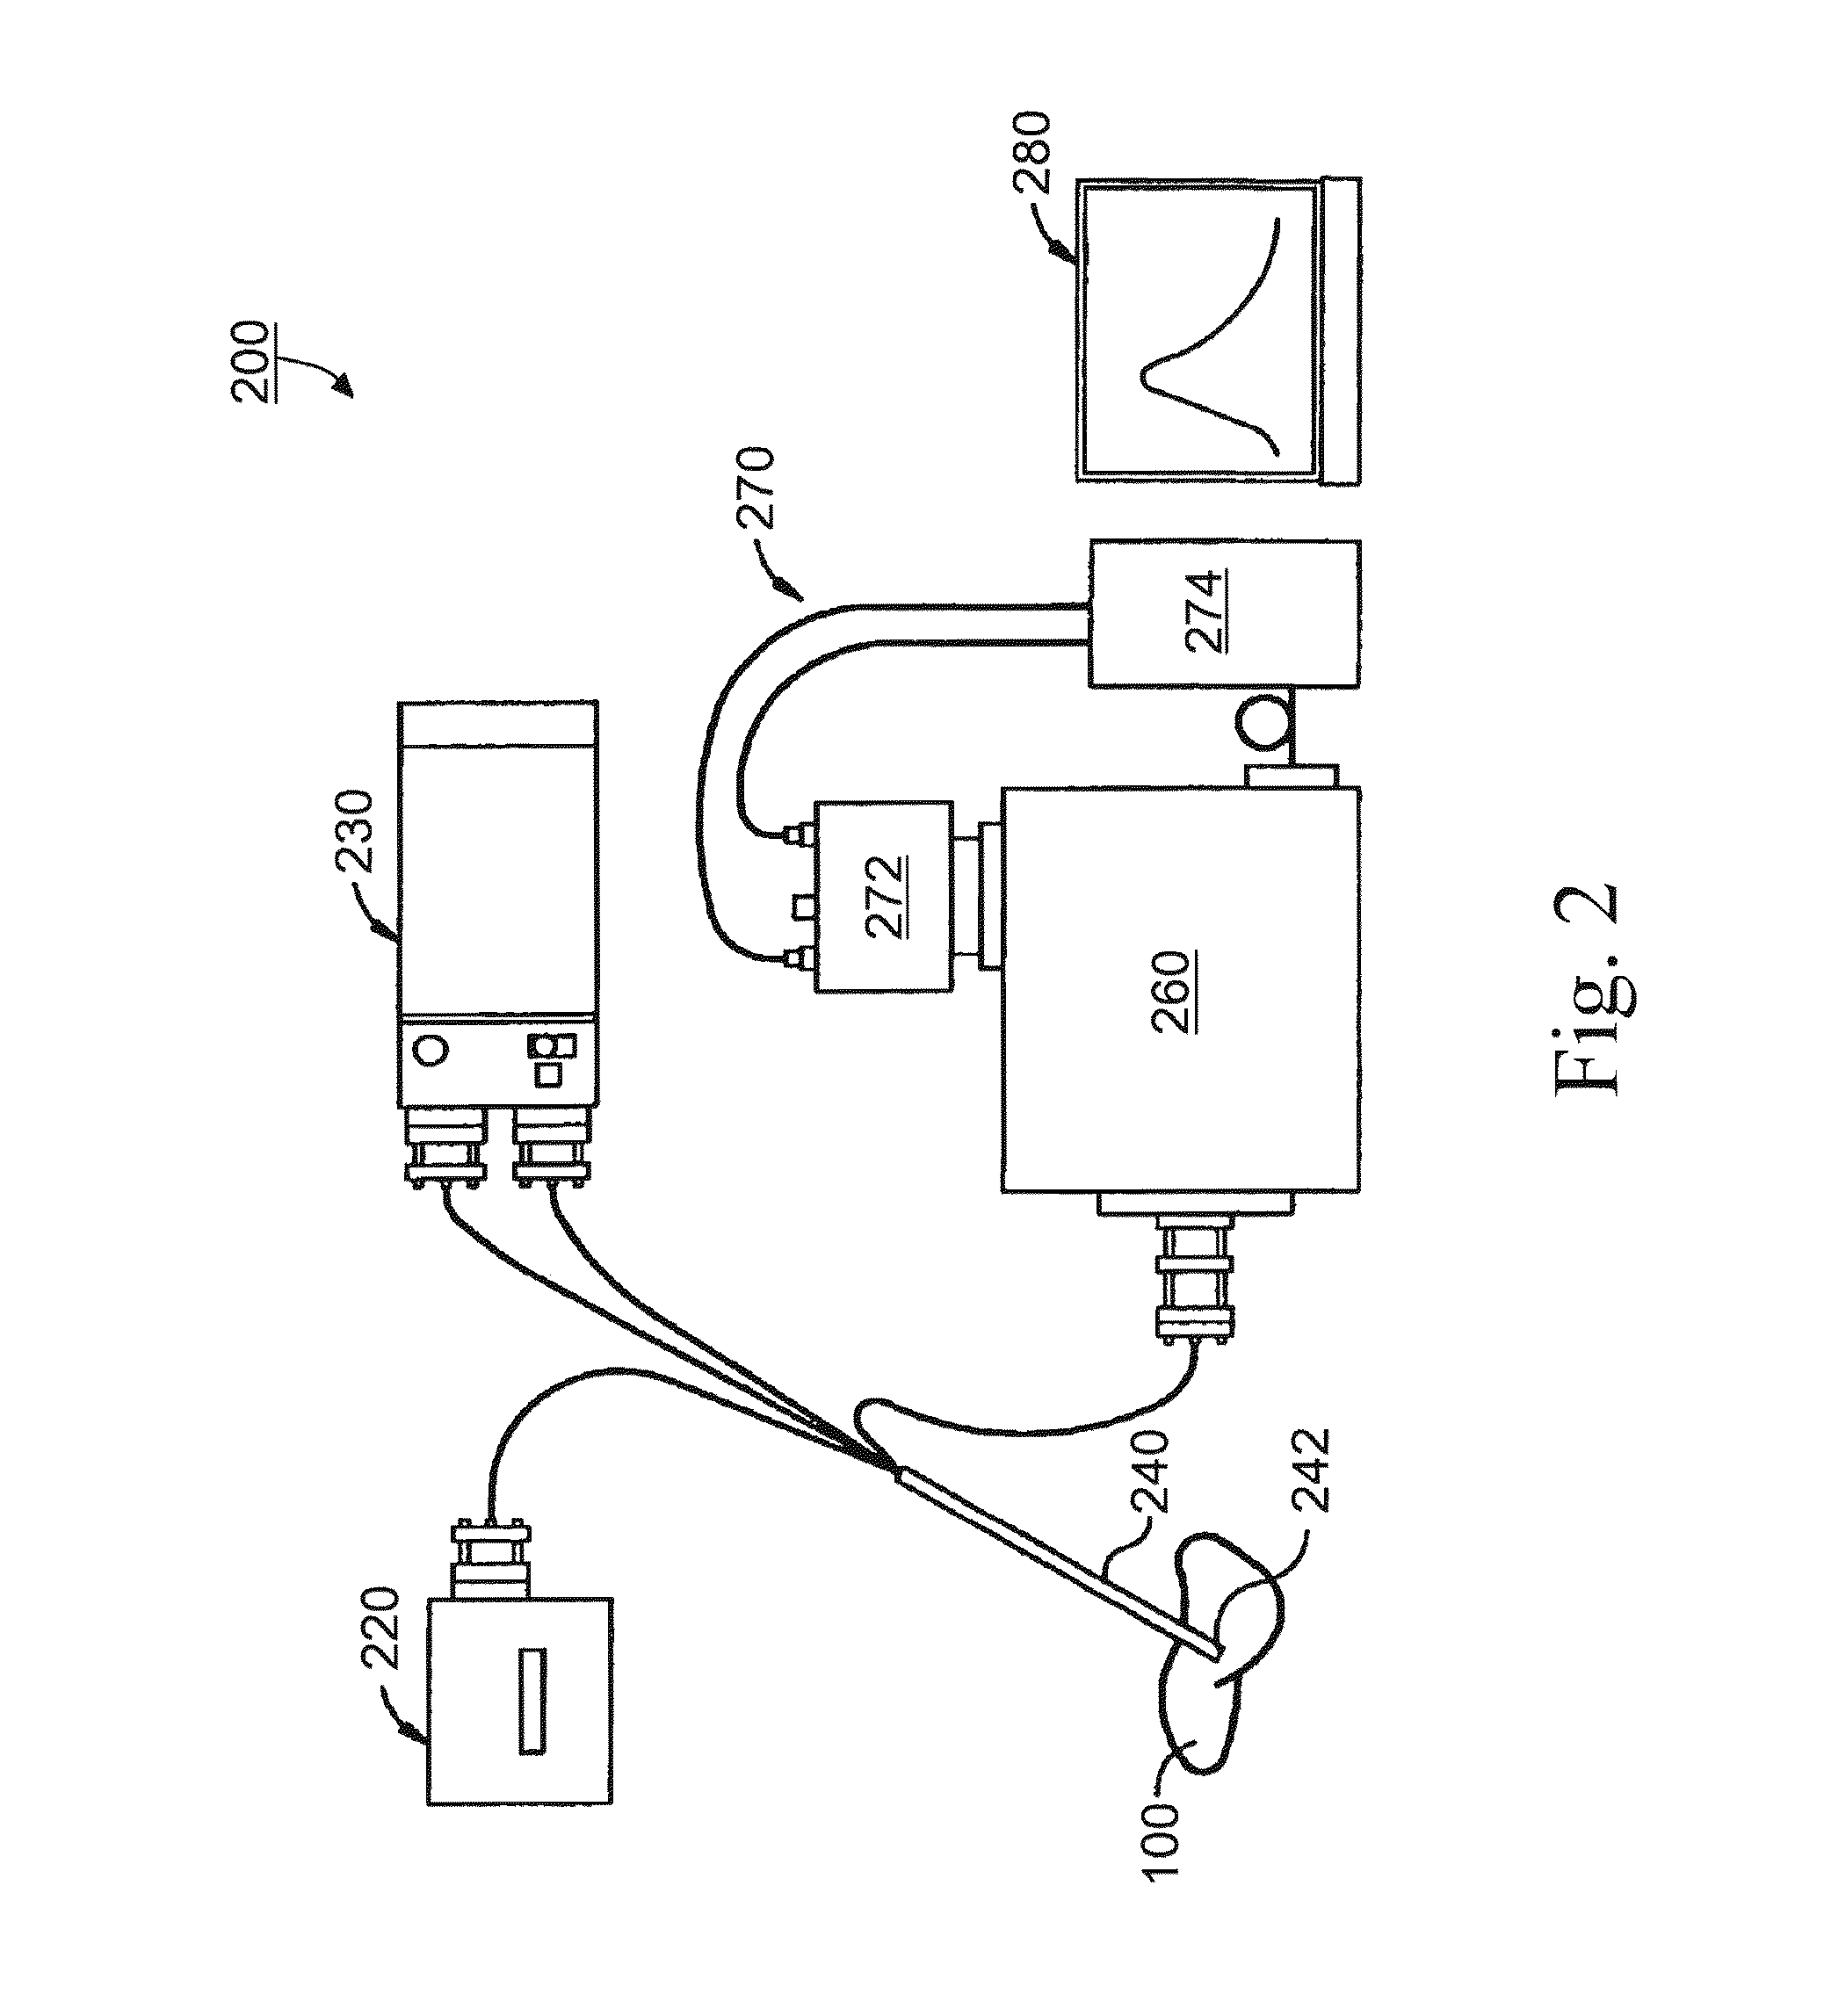 Methods and Apparatus for Optical Spectroscopic Detection of Cell and Tissue Death